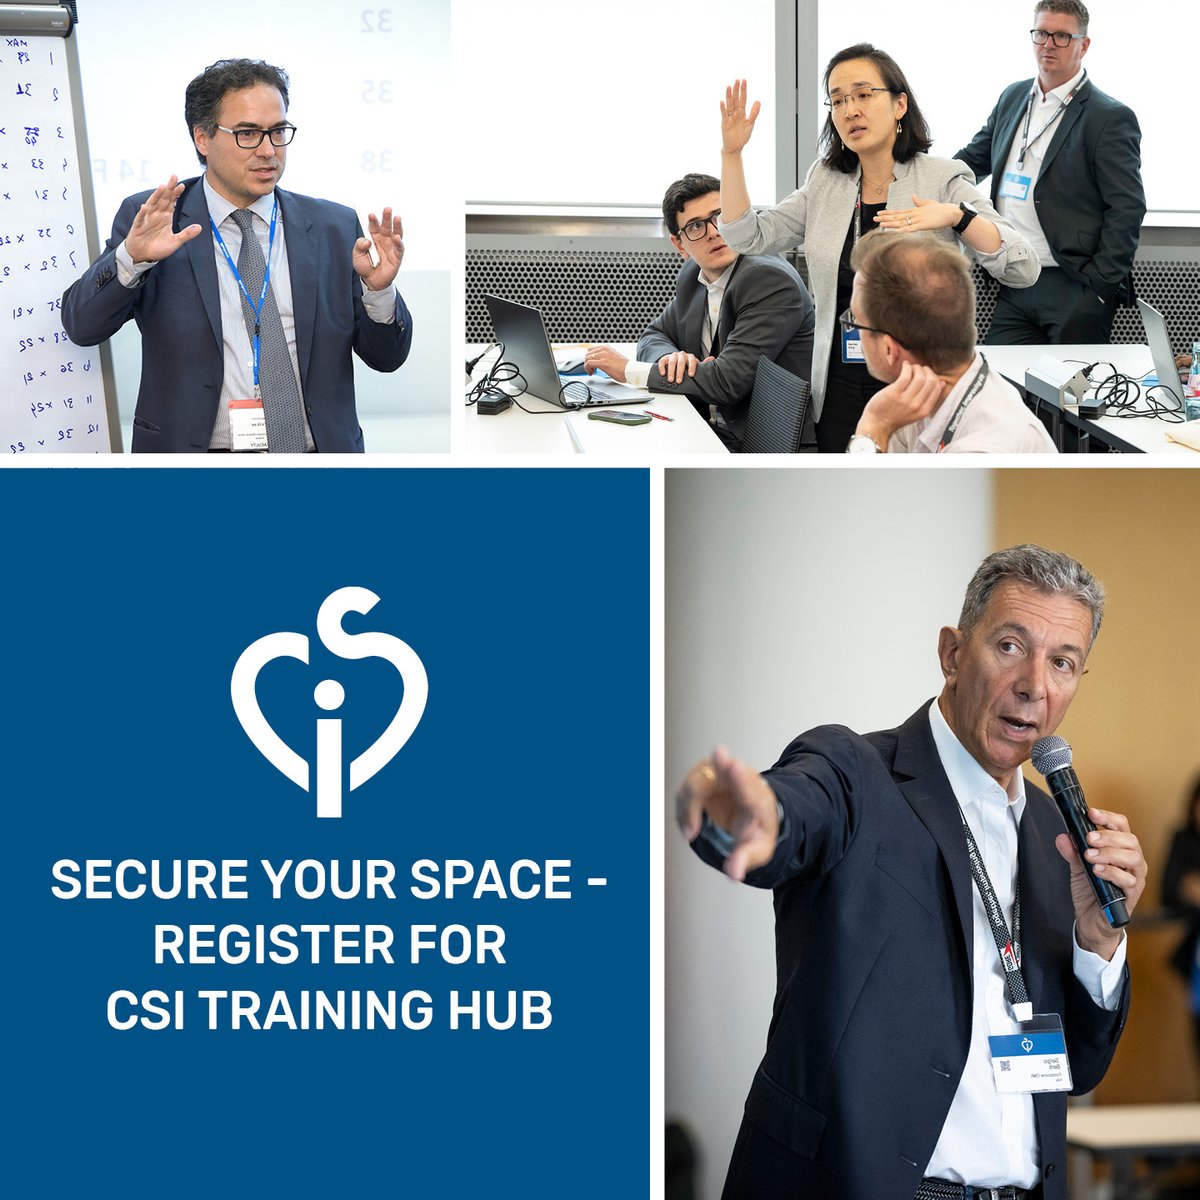 Enhance your abilities in the CSI training hub and take the opportunity to network with your colleagues, participate in our discussions and share your thoughts and experiences. The hands-on workshops have a strong focus on interventional #imaging include TEE and CT training.